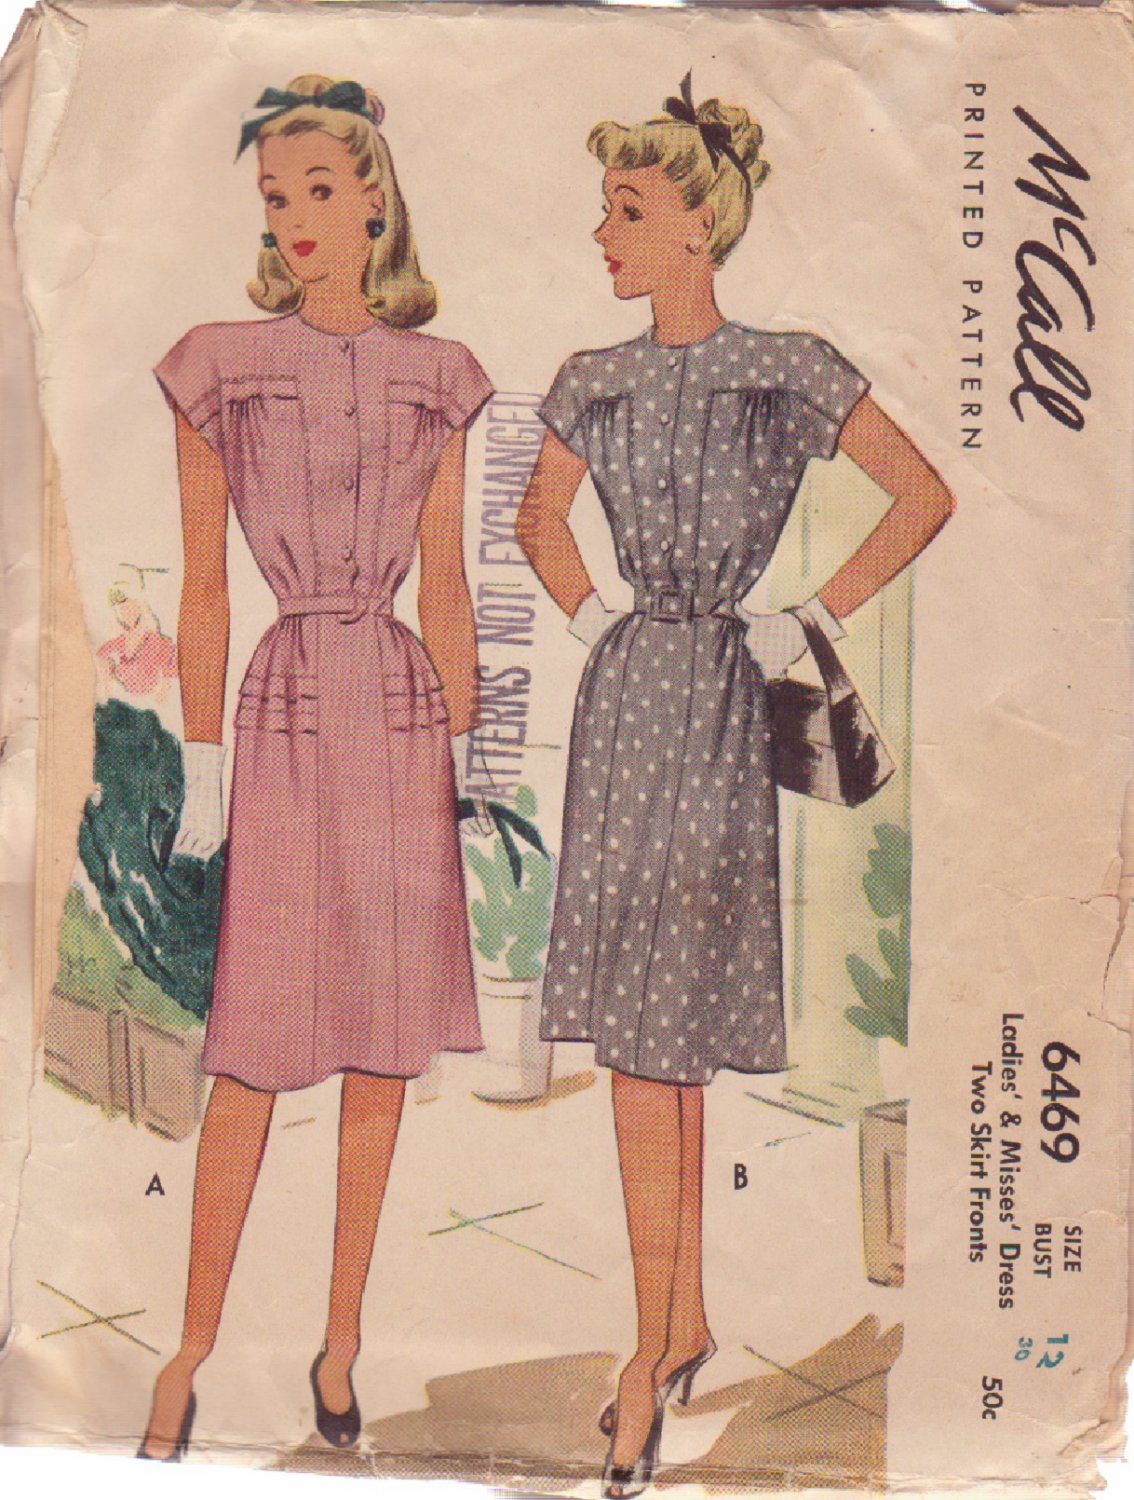 McCALL'S VINTAGE PATTERN 6469 SIZE 12 MISSES' 1946 DRESS IN 2 VARIATIONS